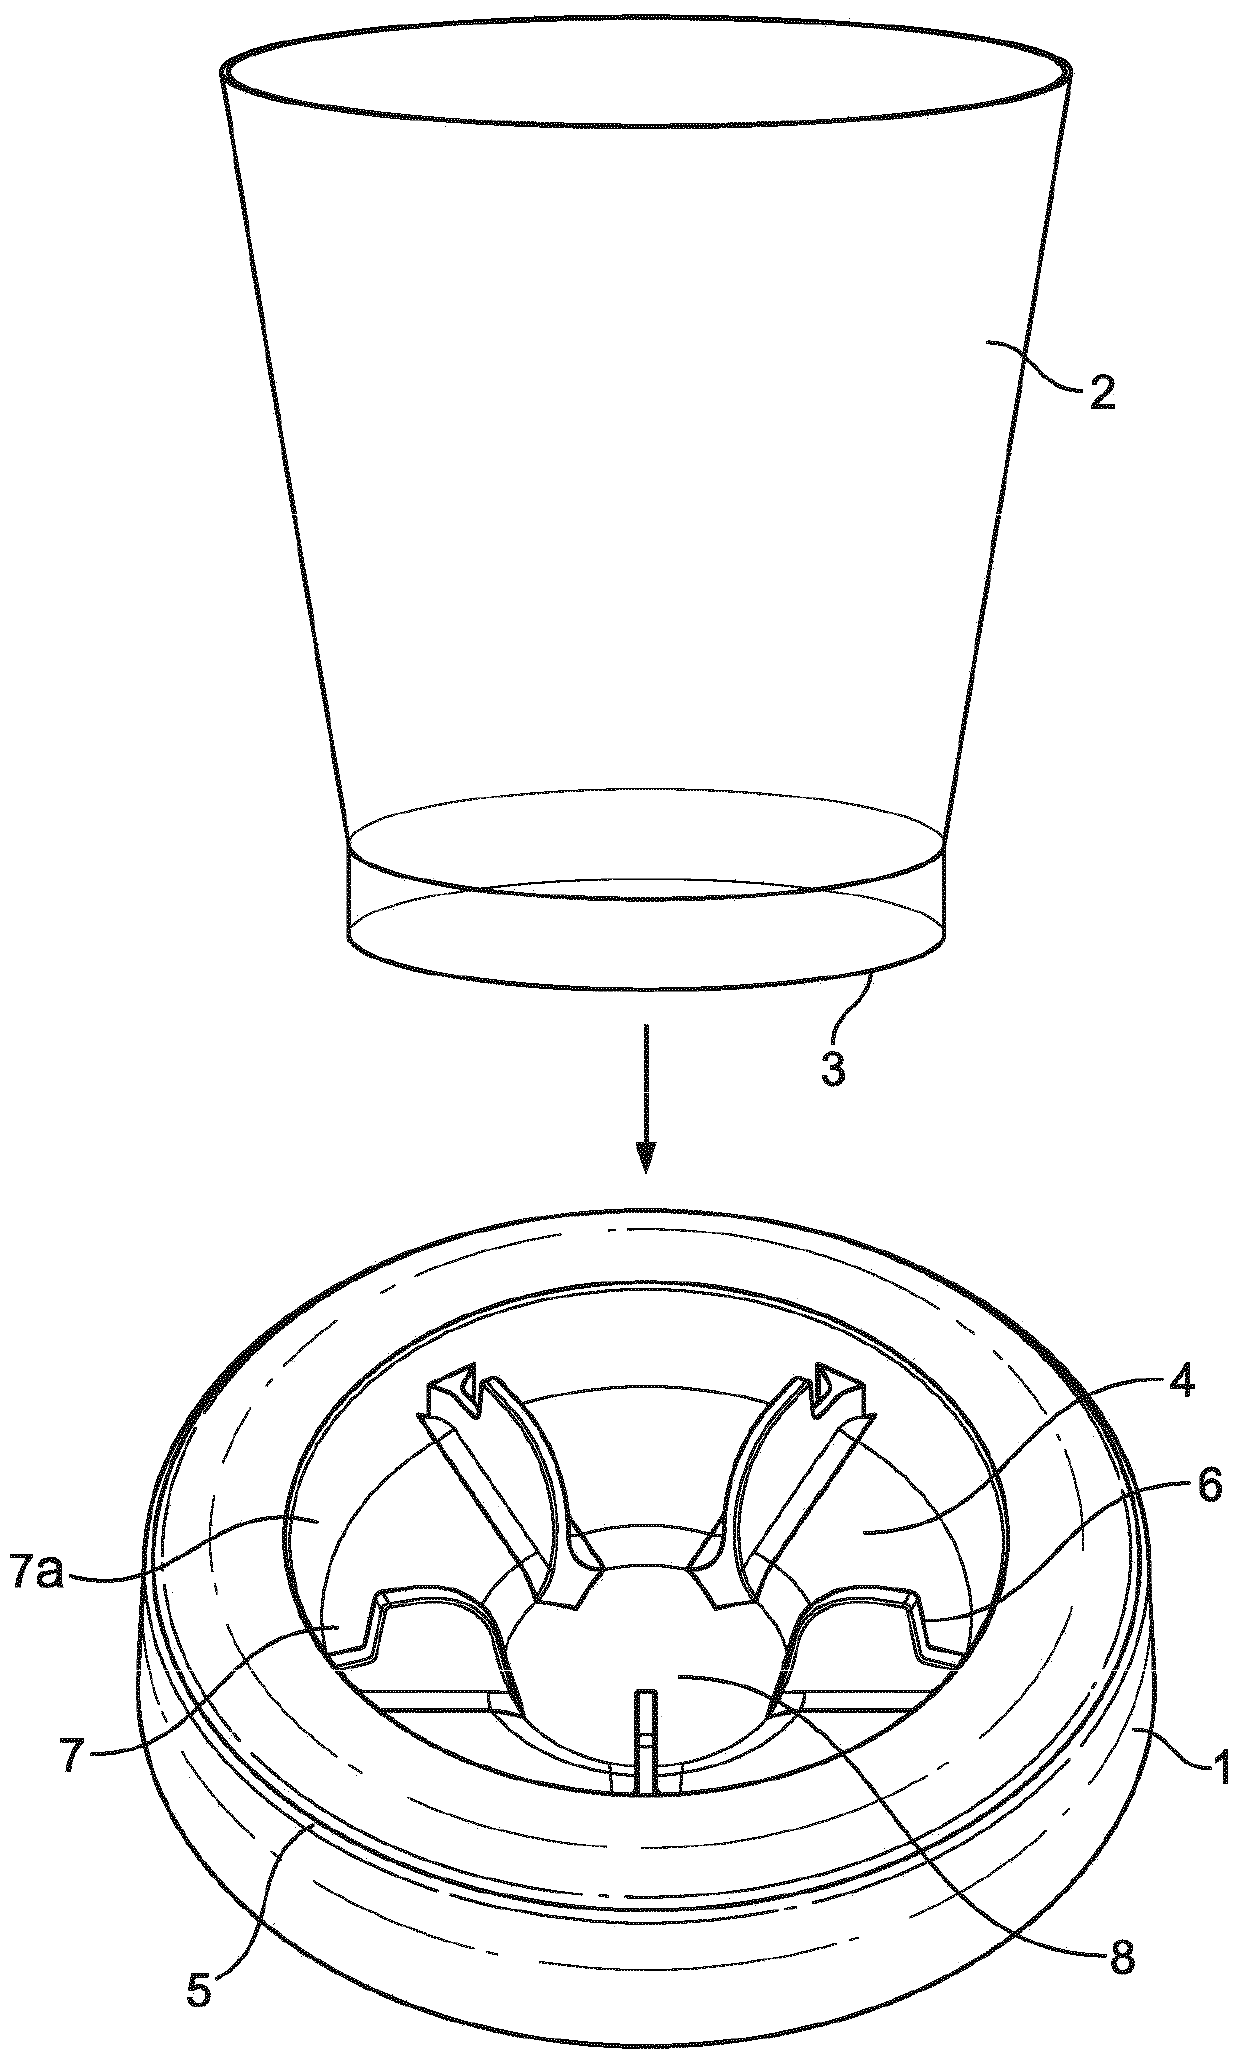 Cup support and dispensing device